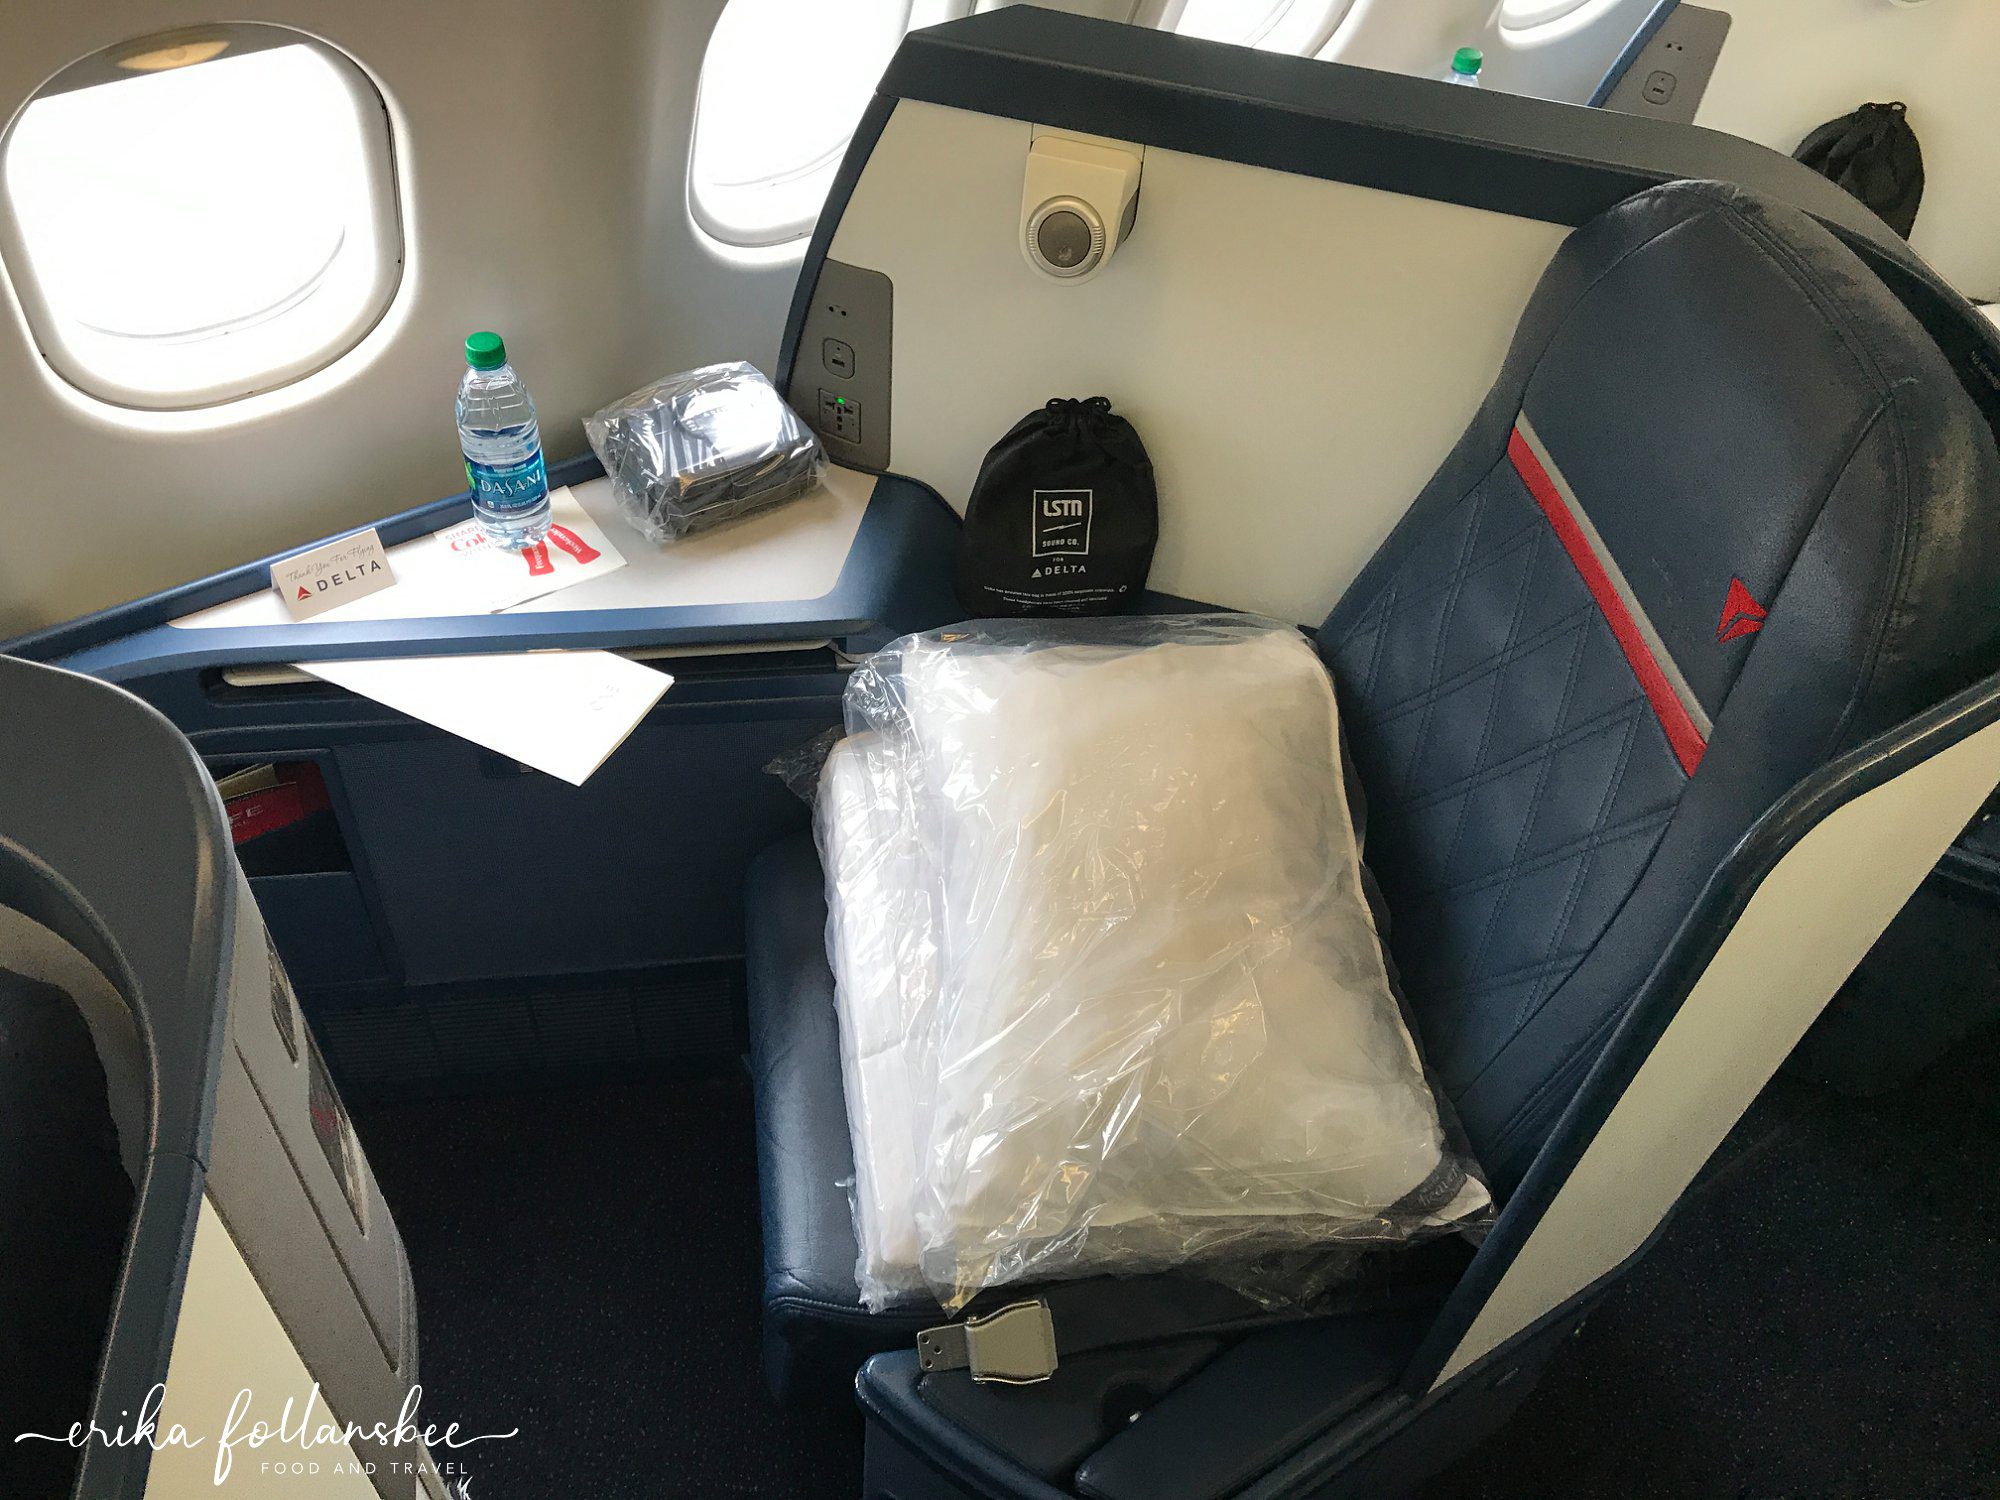 delta one flight BOS-AMS review